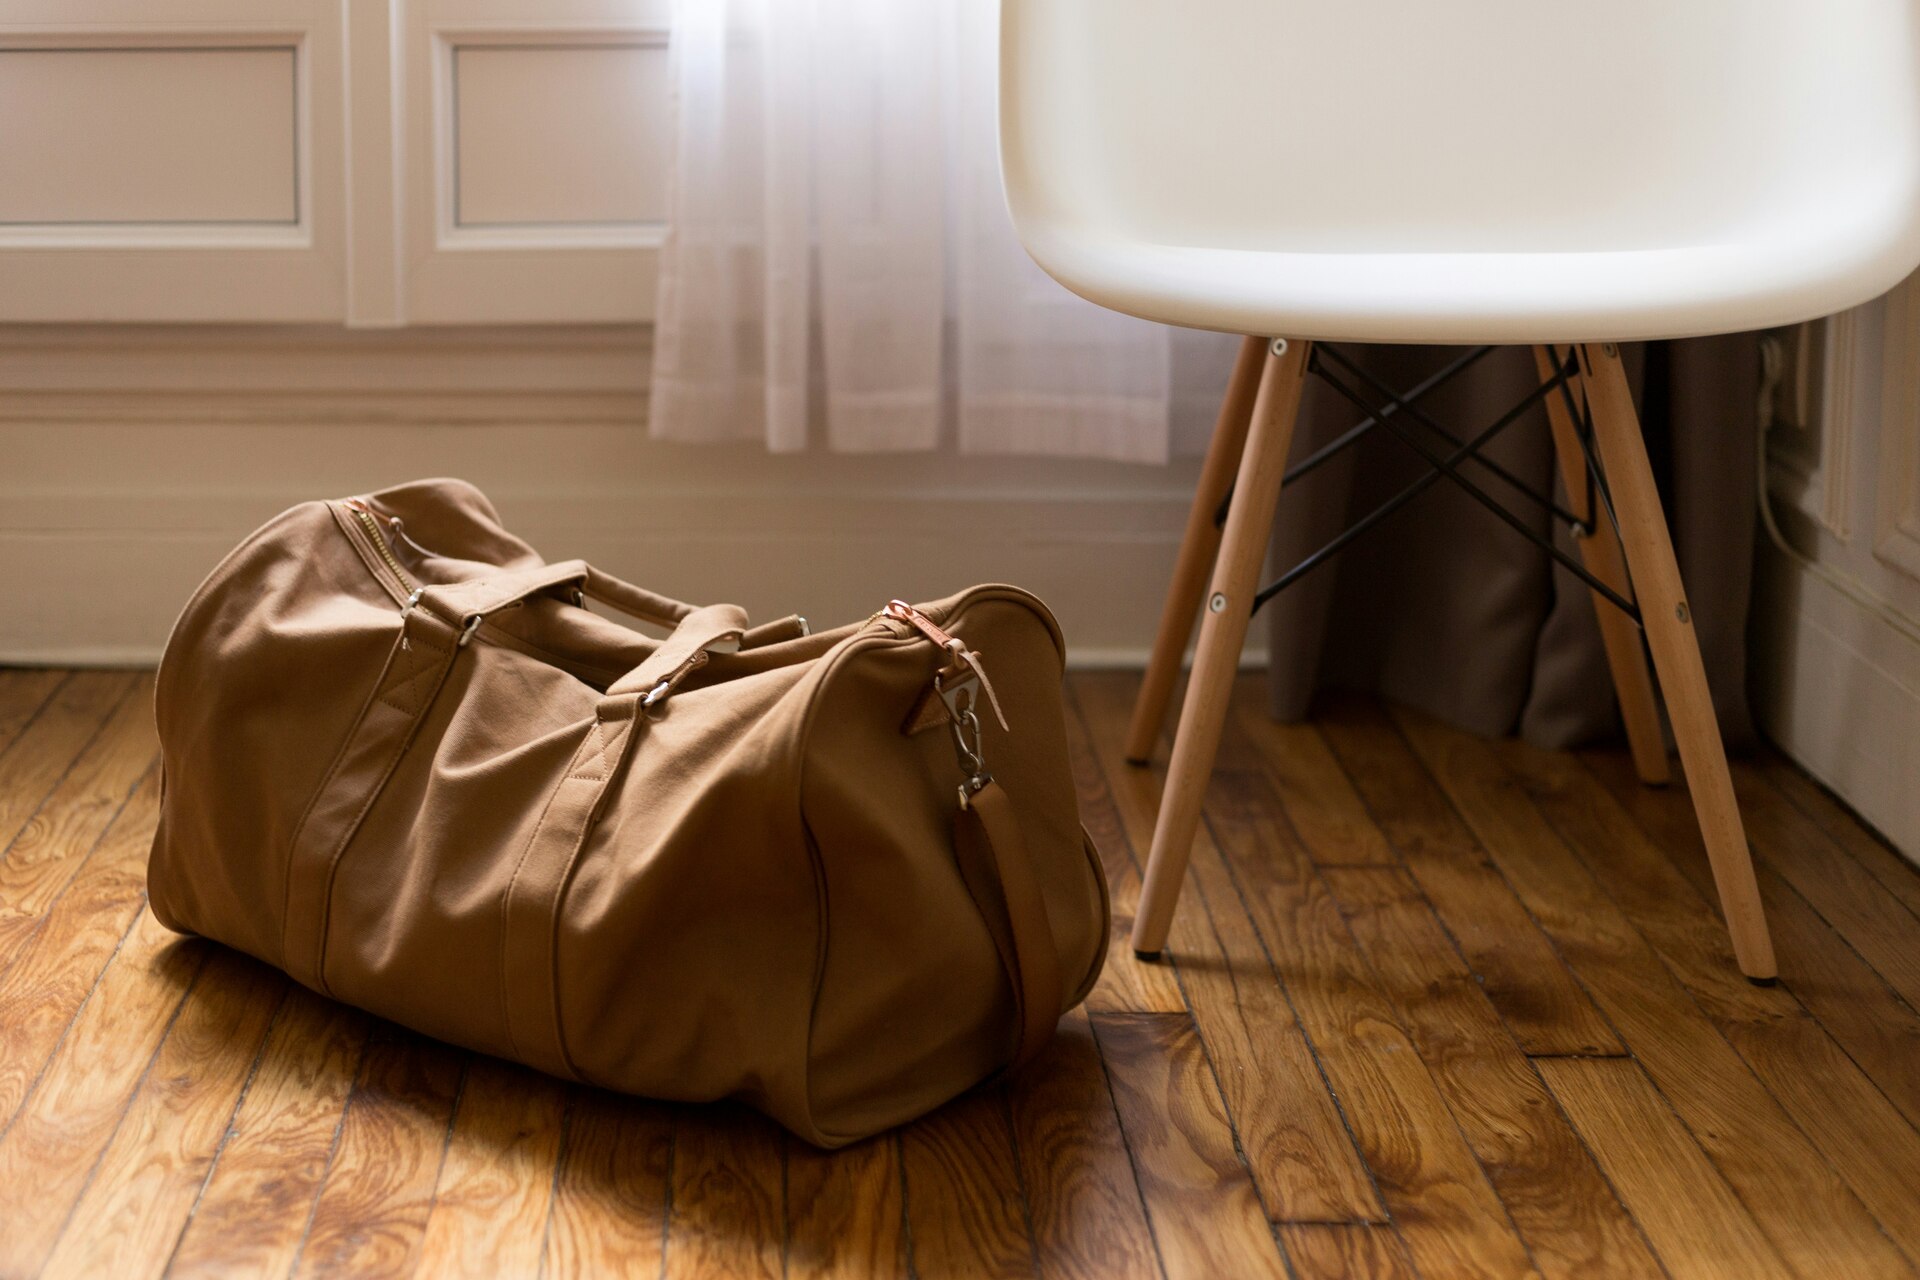 A duffel bag on the floor next to a chair